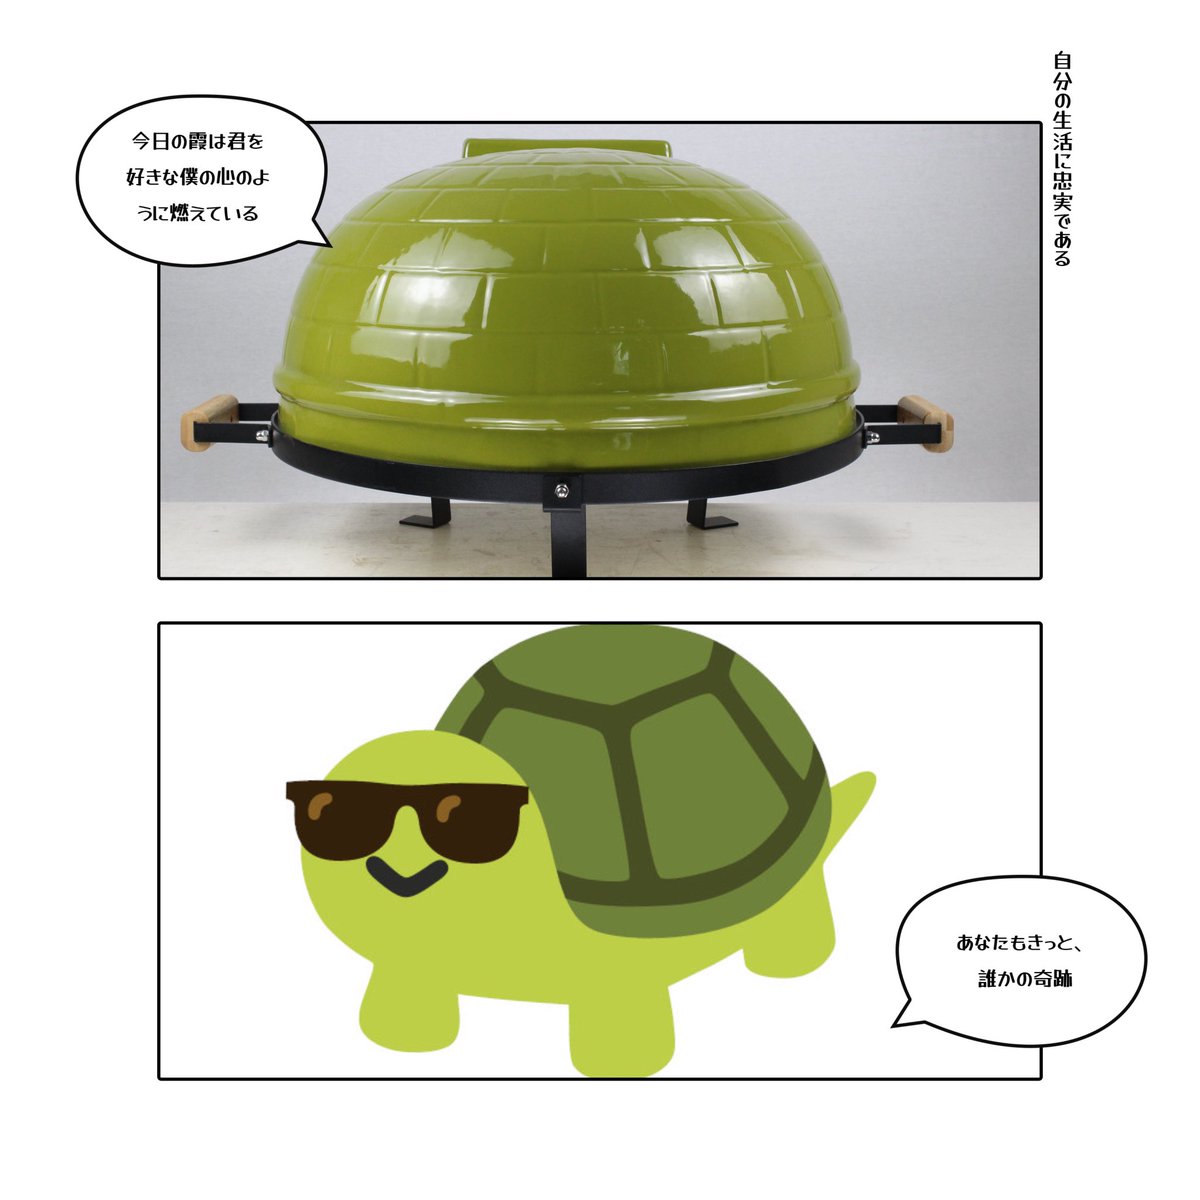 We often refer to tabletop pizza ovens as tortoise ovens. Do you think they are similar?🐢🐢

#KAMADO #Greenegg #AuplexBBQ
#ceramicbbq #outdoorliving #garden 
#Auplex
#bbqgrill
#kamadobbq
#outdoorbbq
#outdoorkitchen
#quality 
#OEMserive